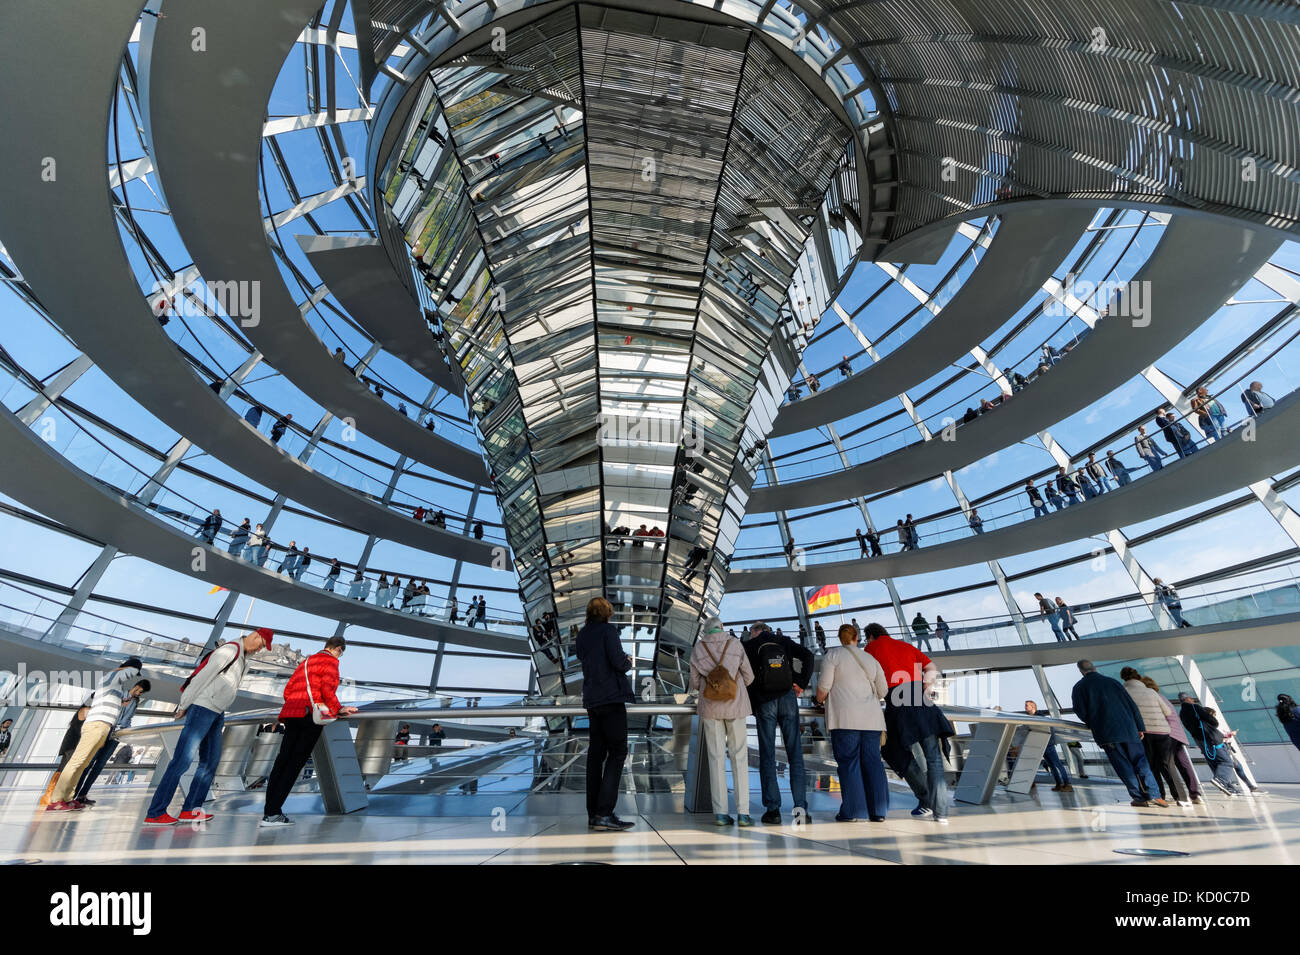 Visitors at the Reichstag dome in Berlin, Germany Stock Photo